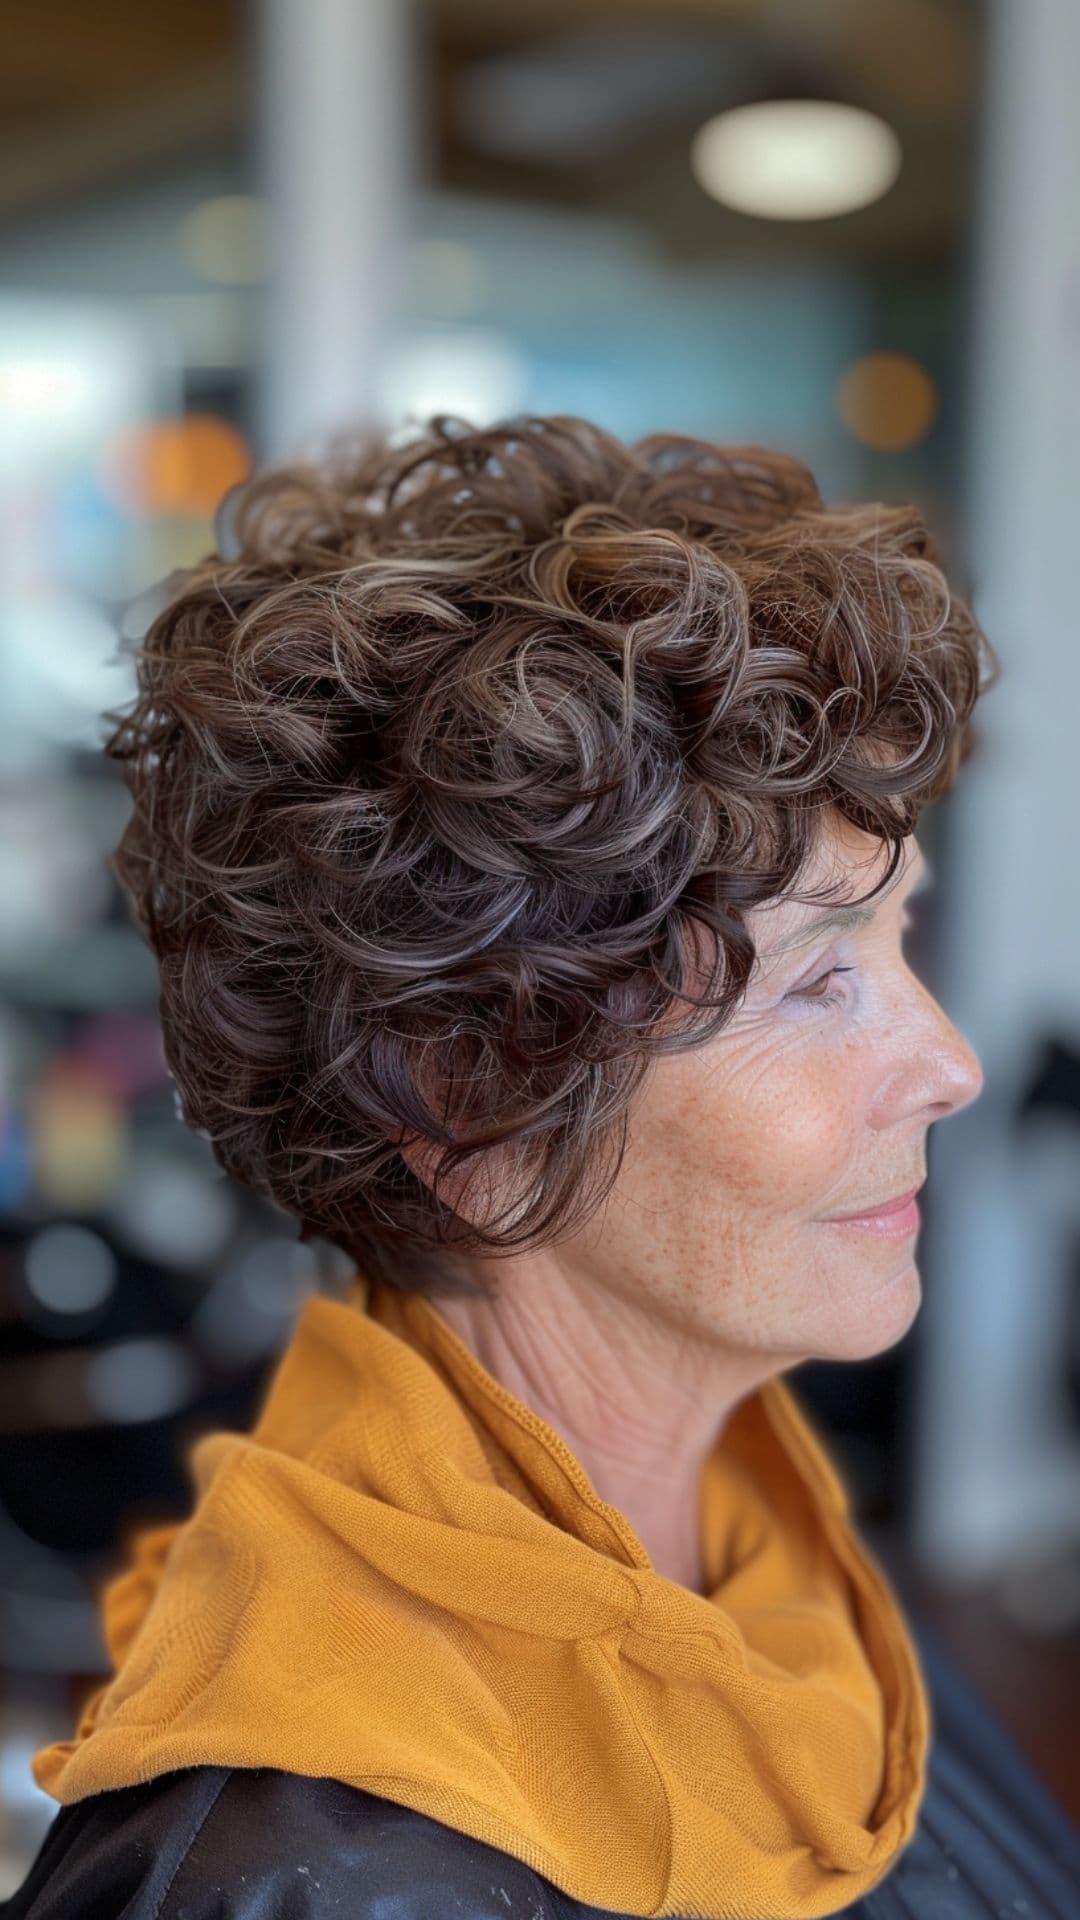 An old woman modelling a curly pixie hair.